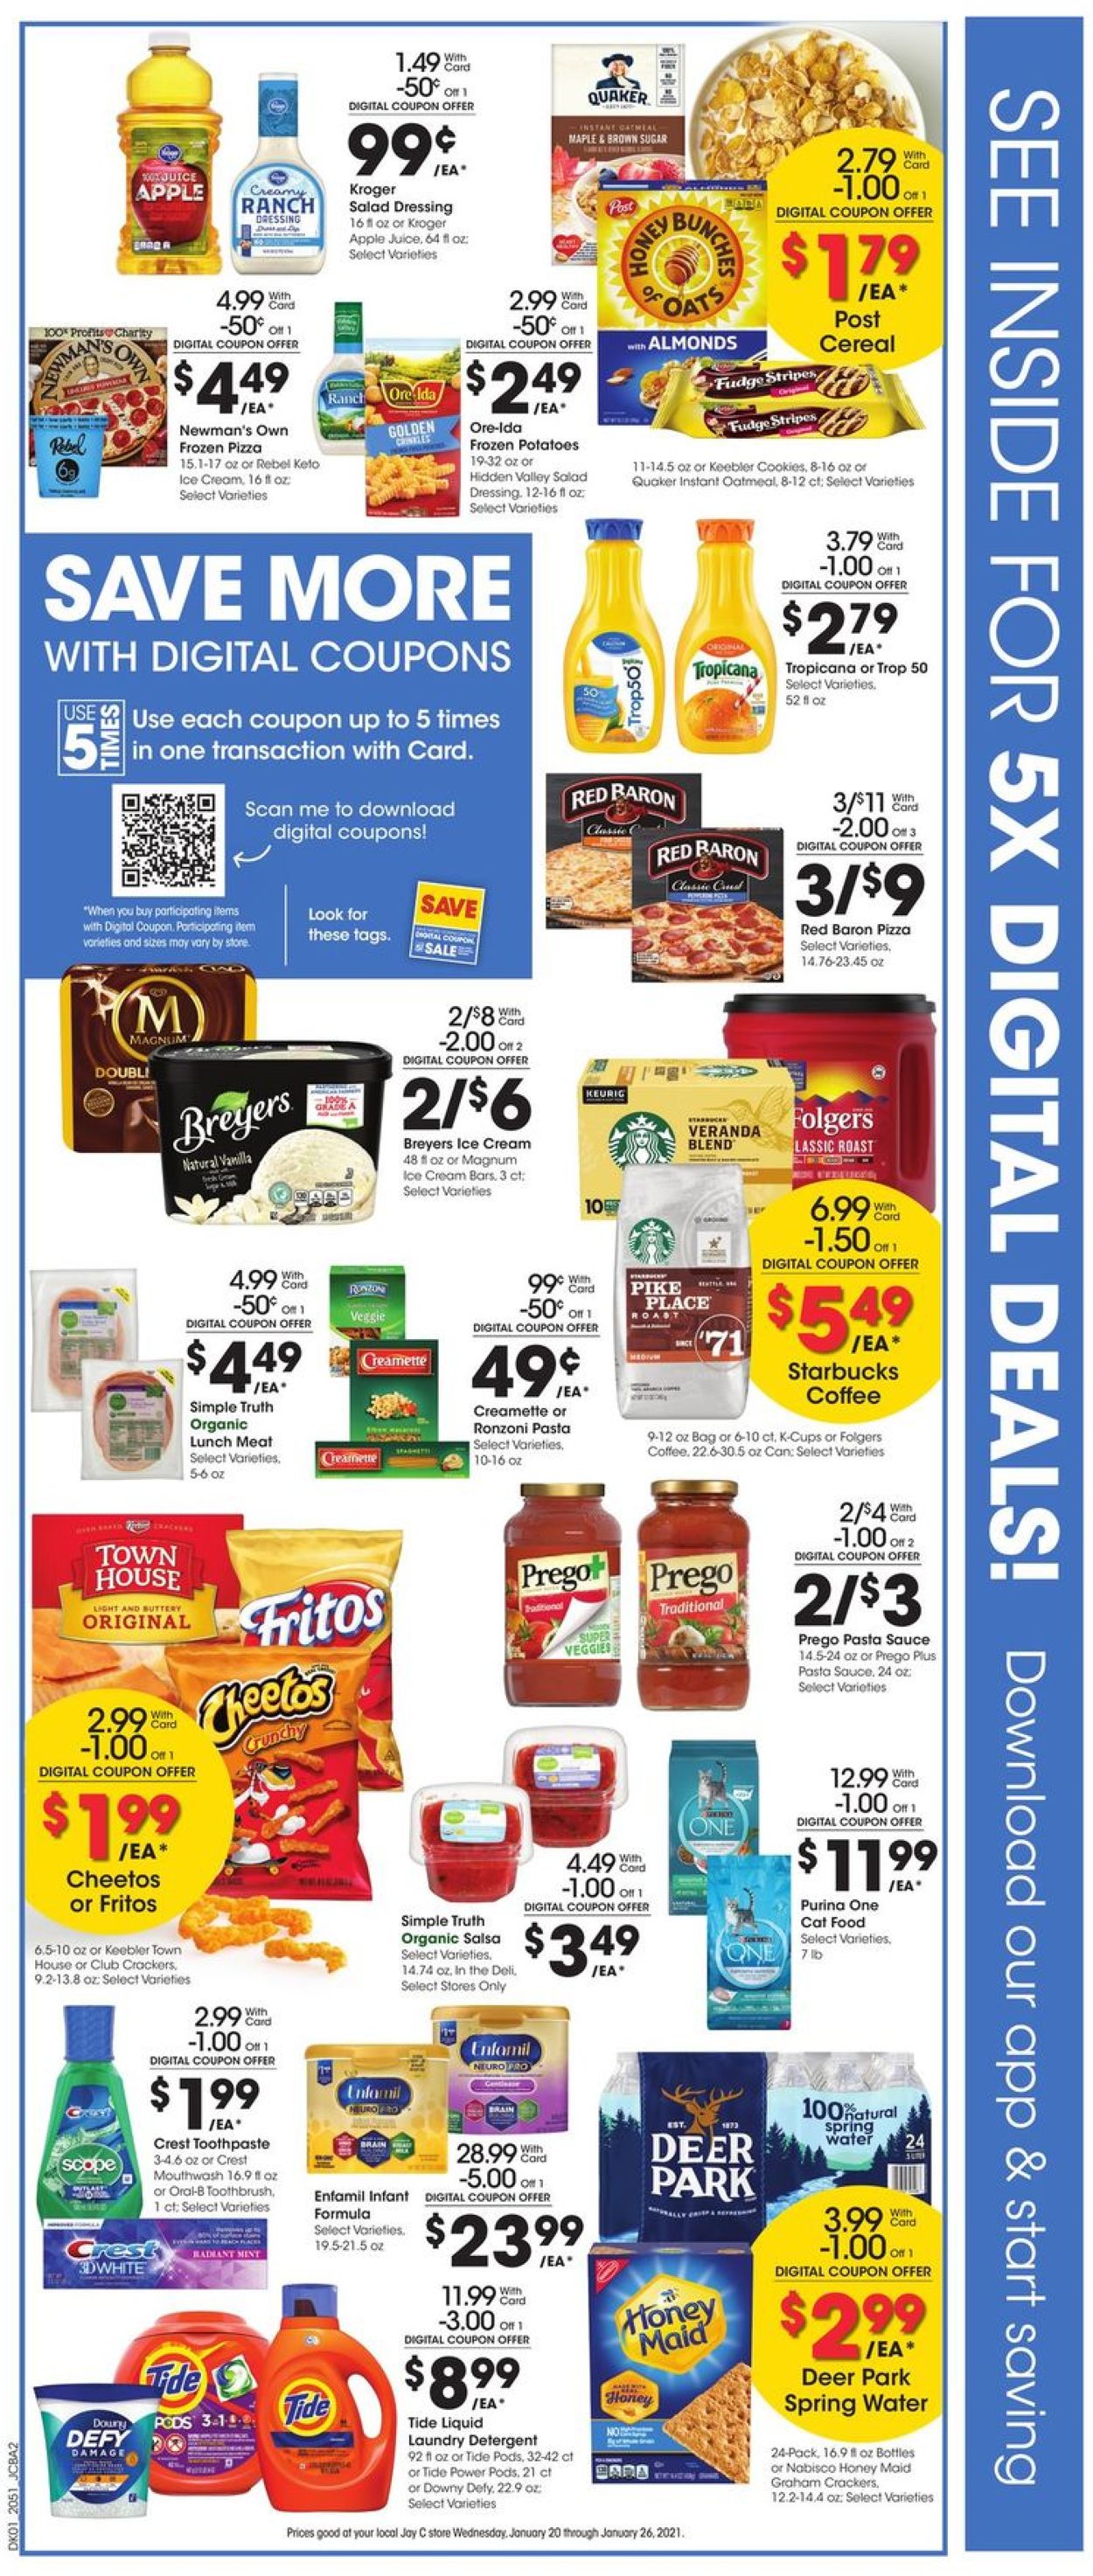 Catalogue Jay C Food Stores from 01/20/2021